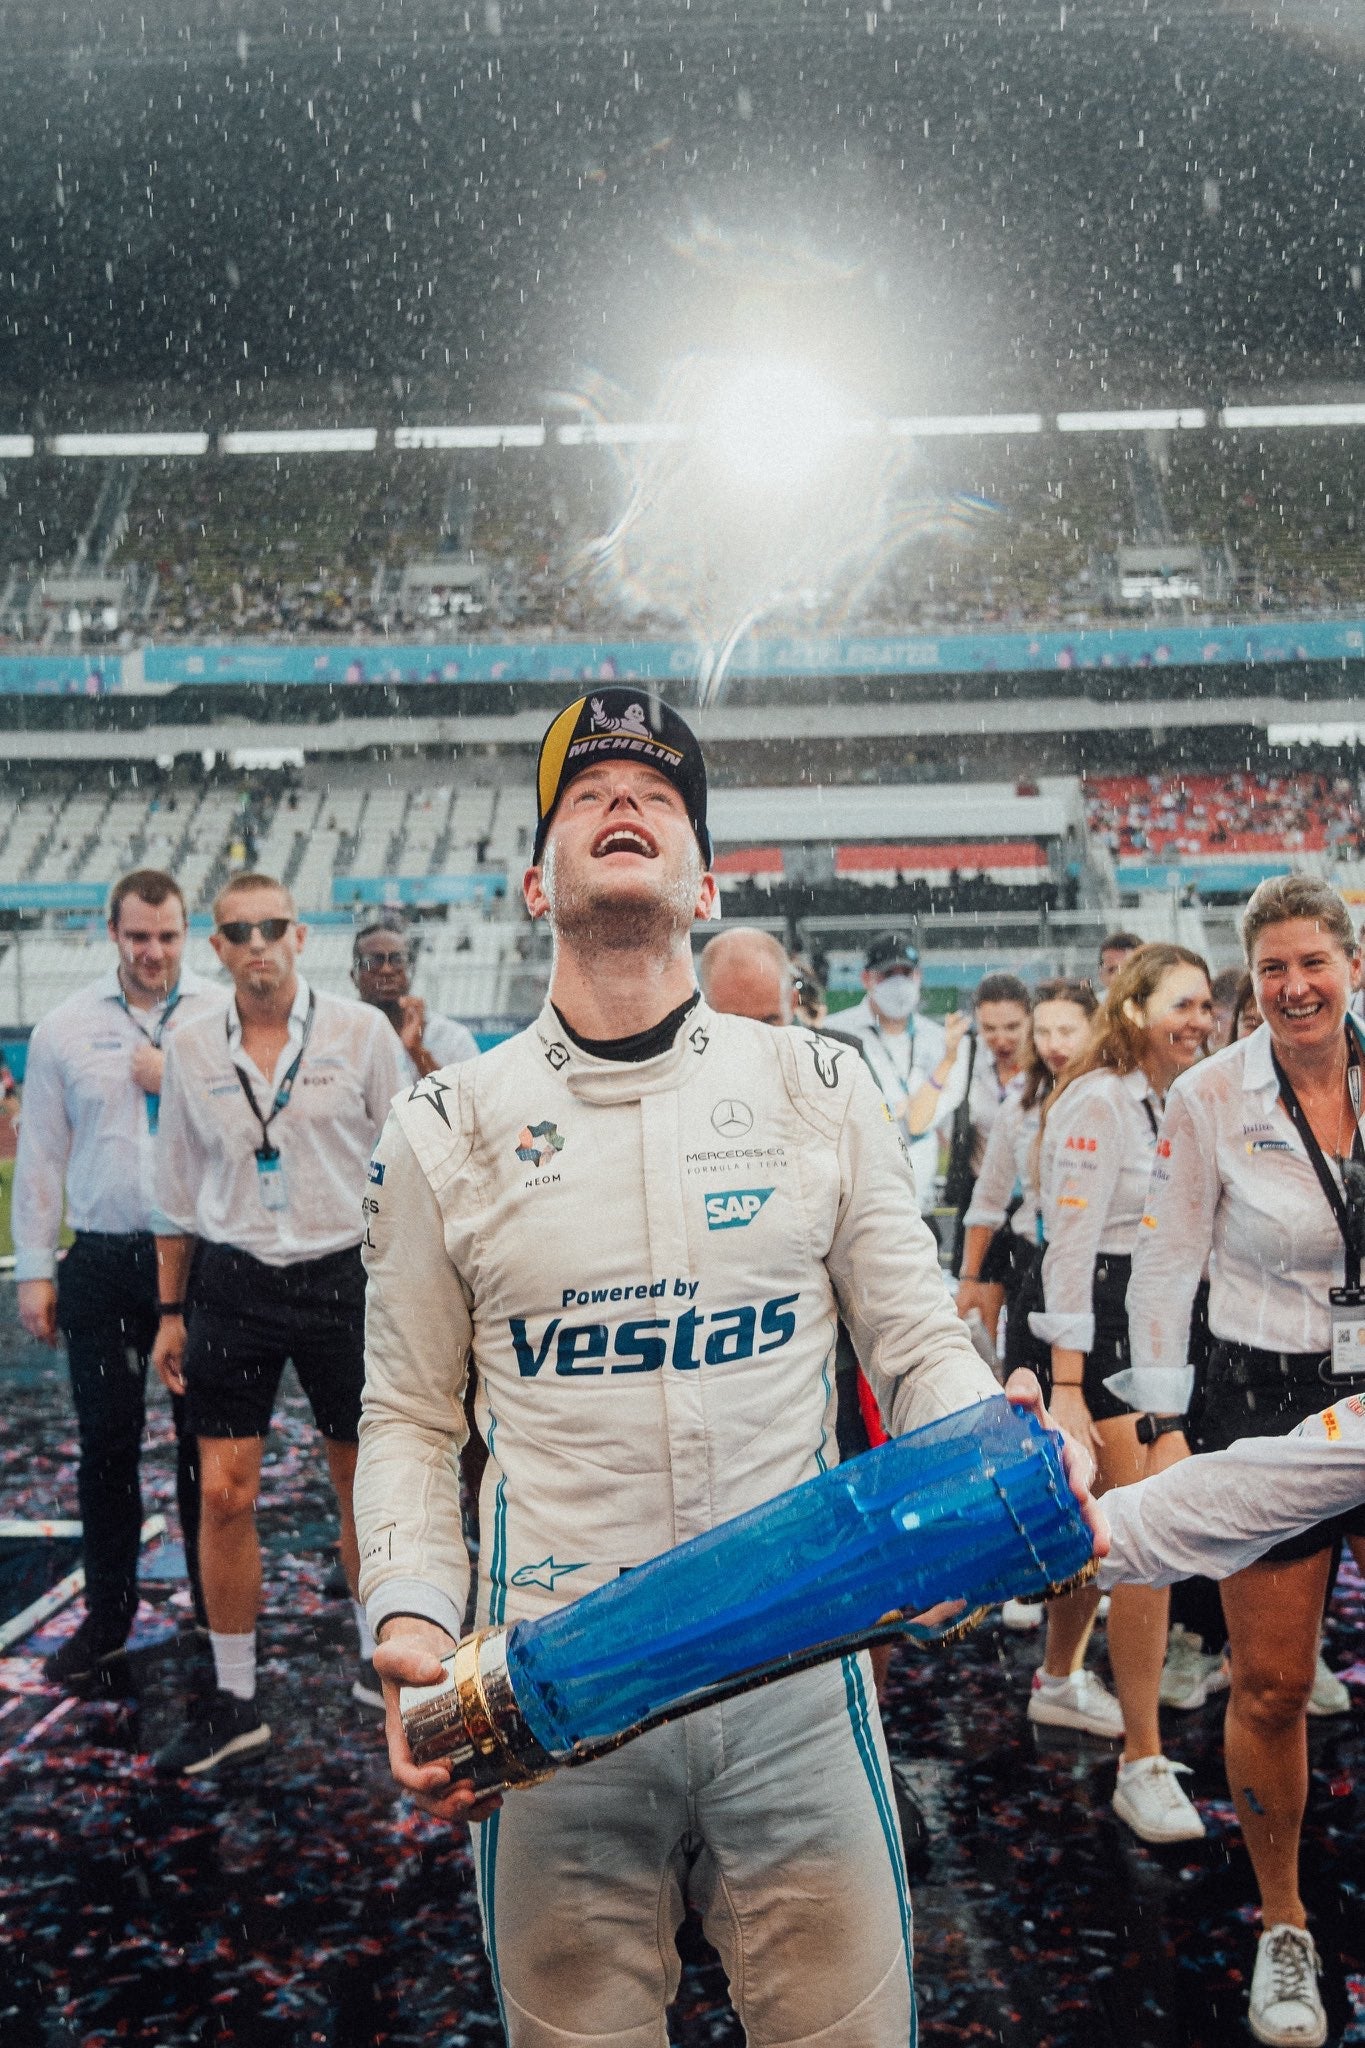 STOFFEL VANDOORNE IS THE 2021/22 FORMULA E WORLD CHAMPION AFTER PODIUM FINISH AT THE FINAL RACE OF THE SEASON IN SEOUL, SOUTH KOREA